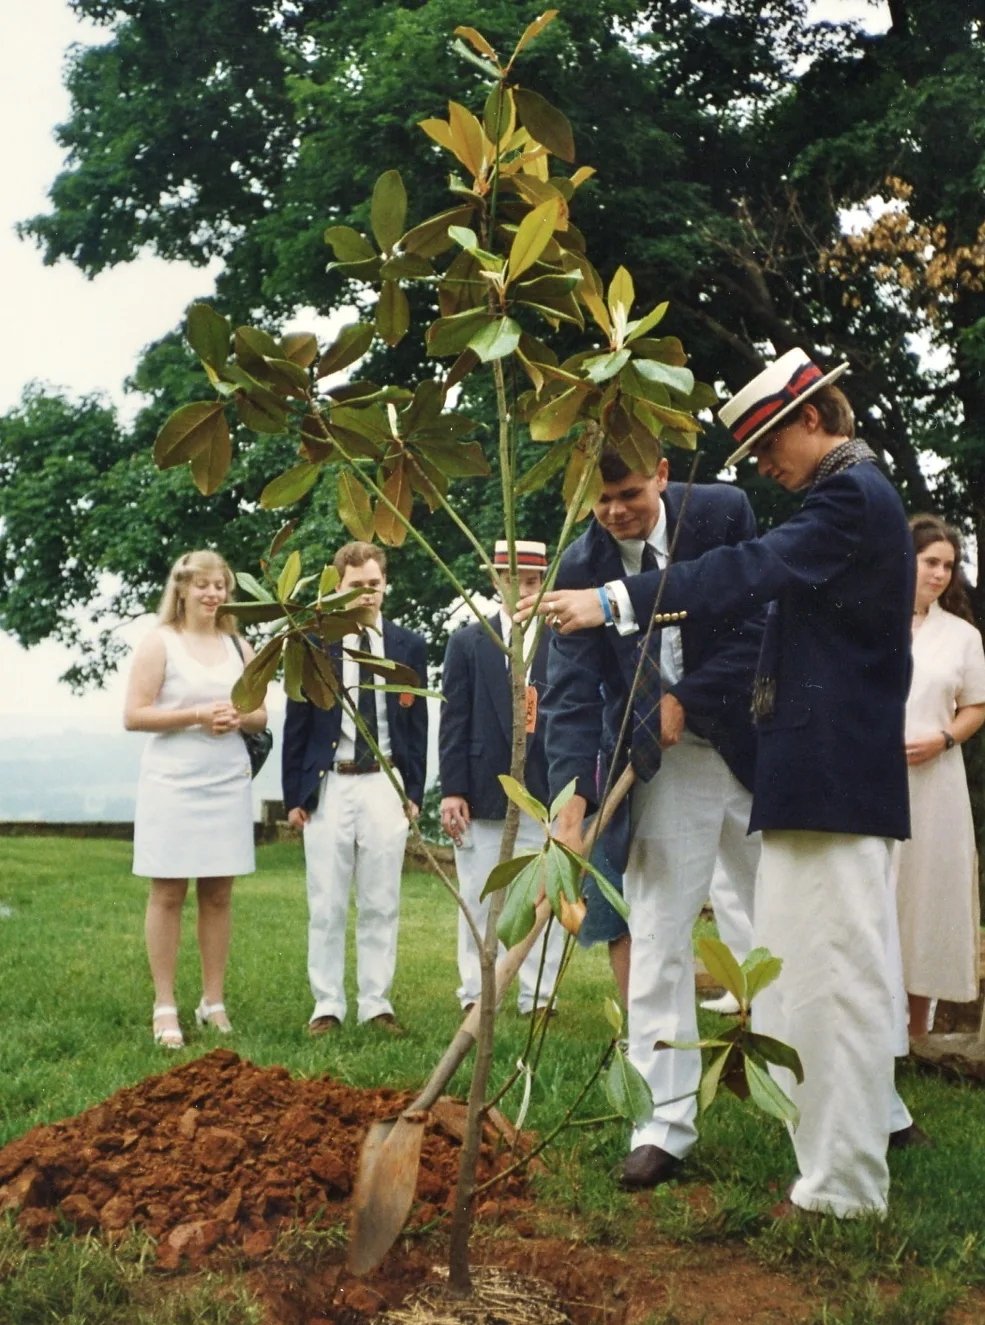 students planting a tree during graduation ceremony